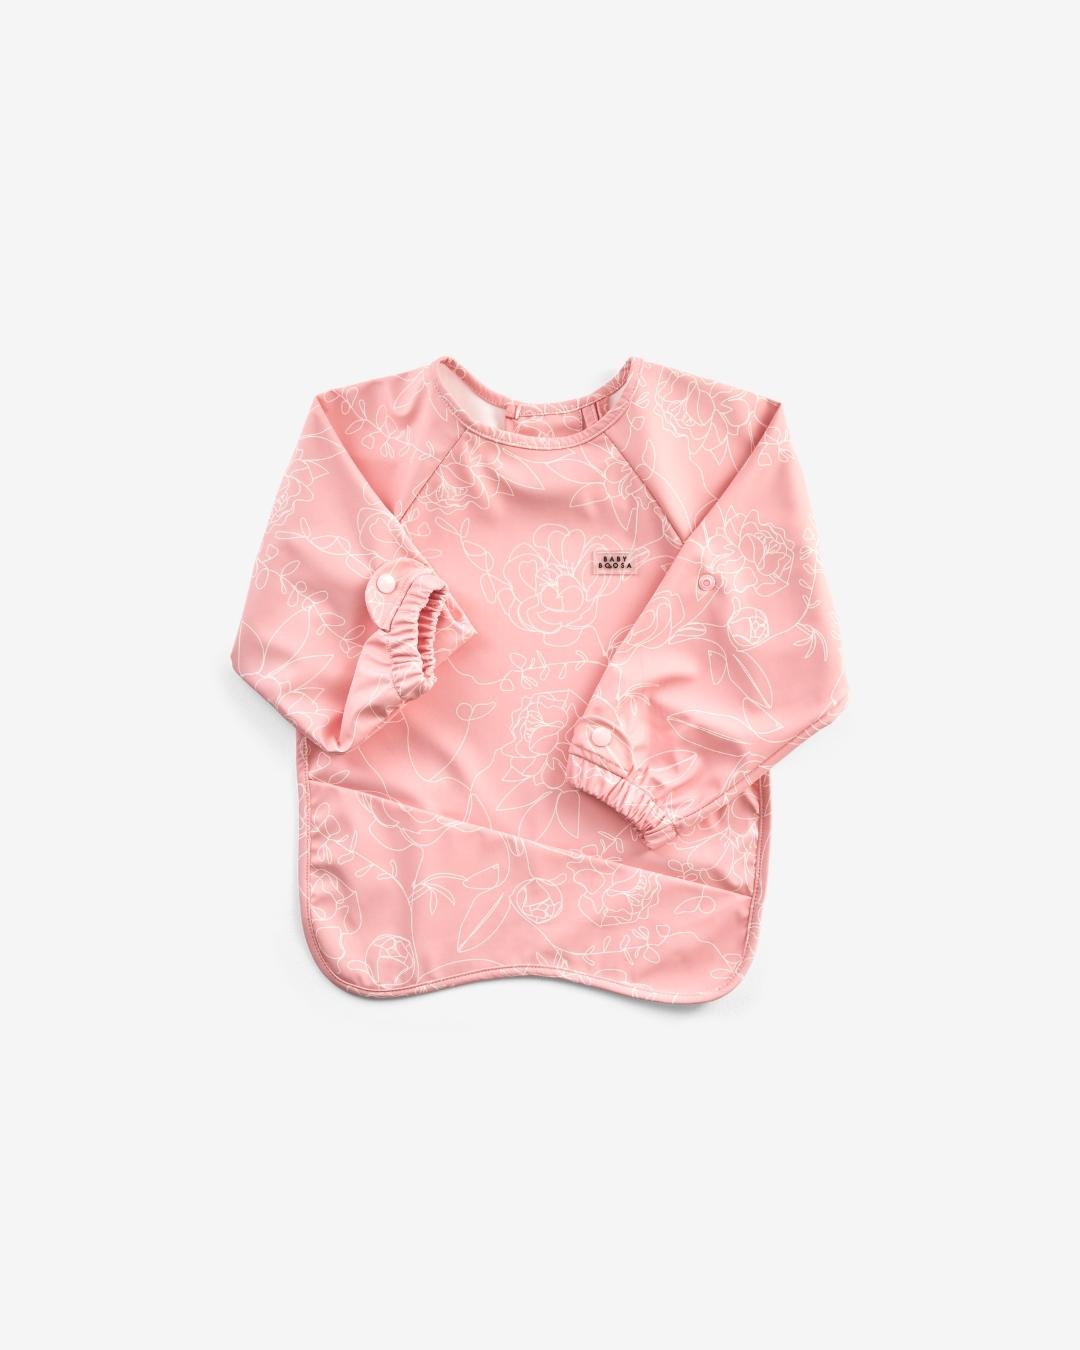 Comfort Fit Coverall Bib | Adjustable Neck &amp; Arms | Easy Clean | No-mess | Waterproof | Eco Recycled (Sakura Print)